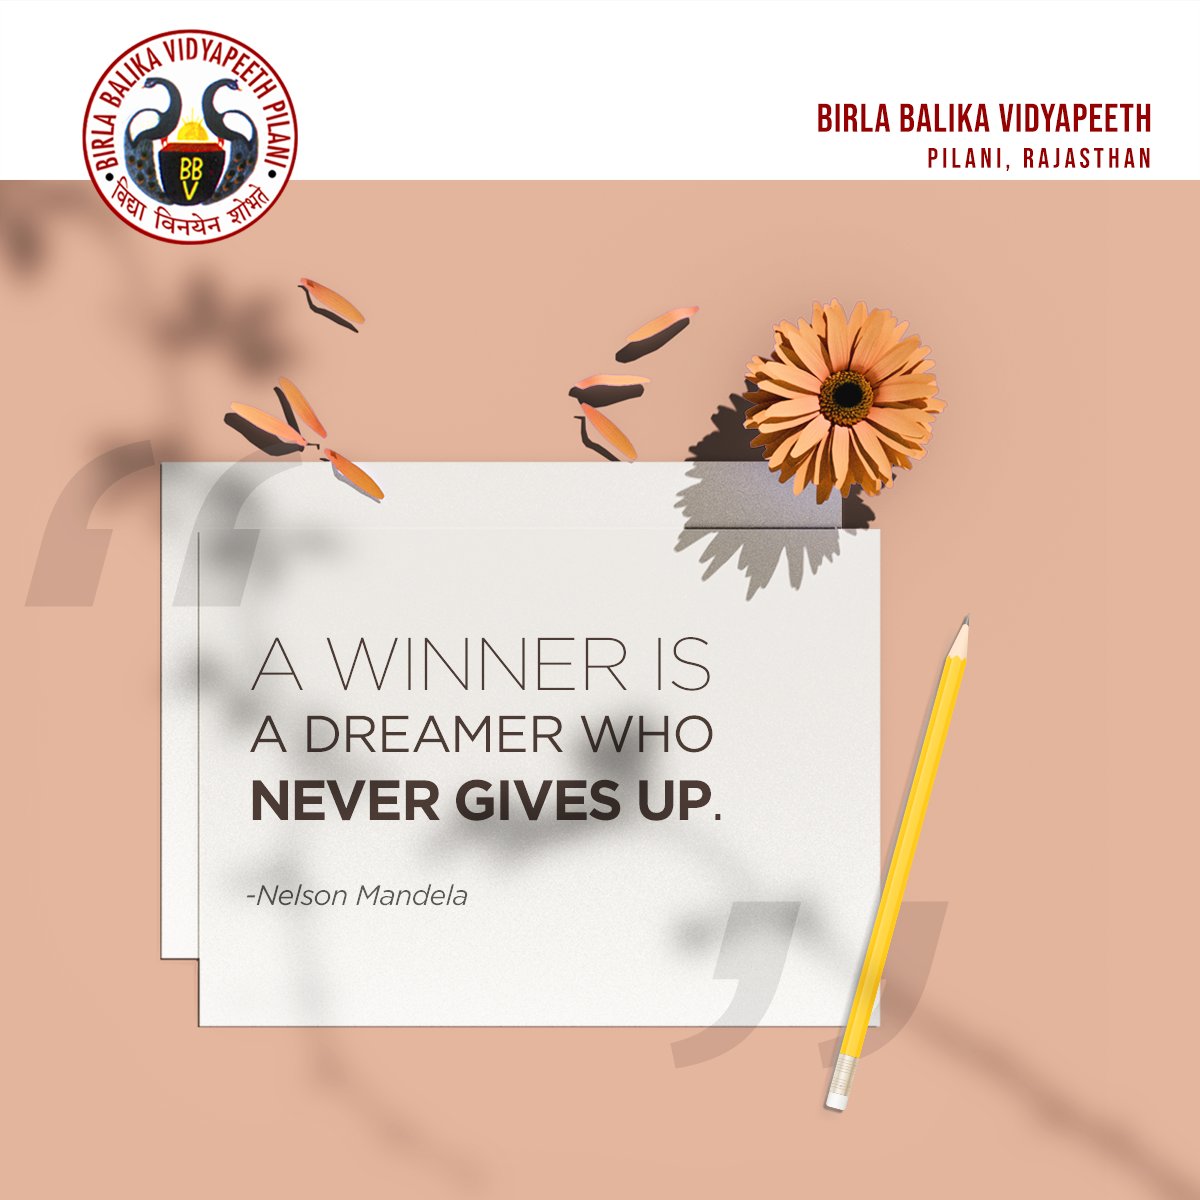 #Dream, set your goals high and don't stop till the dream is accomplished because winners never quit.

#BBVPilani #BetPilani #BBVP #ThoughtOfTheDay #MotivationQuote #InspirationForLife #PositiveQuotes #QuotesToLiveBy #WordsOfWisdom